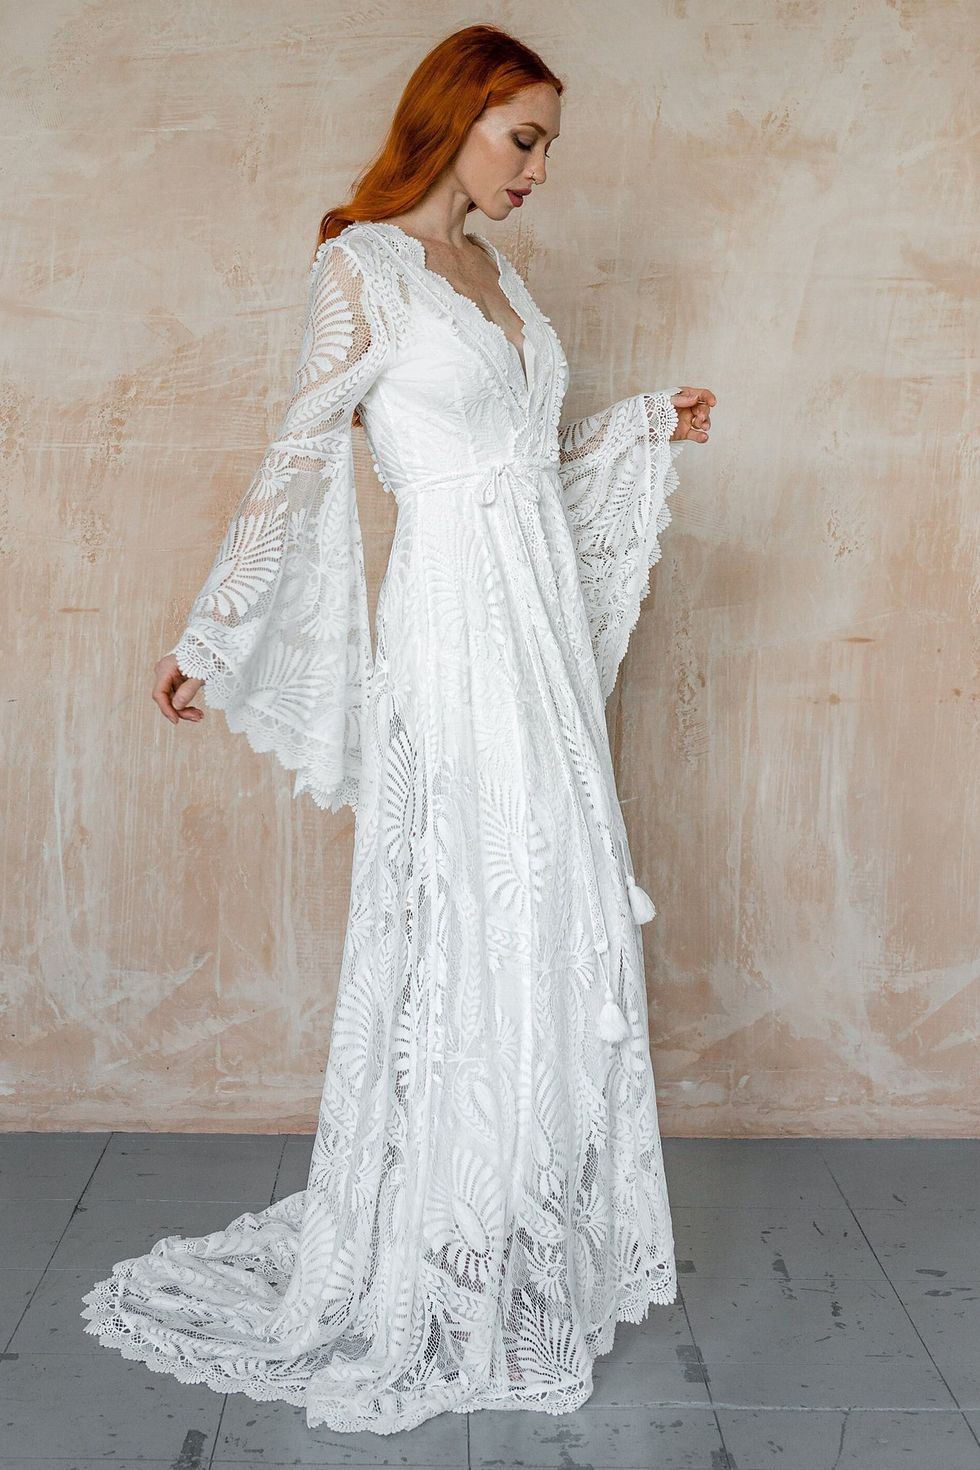 Lace boho wedding dress with long wide sleeves